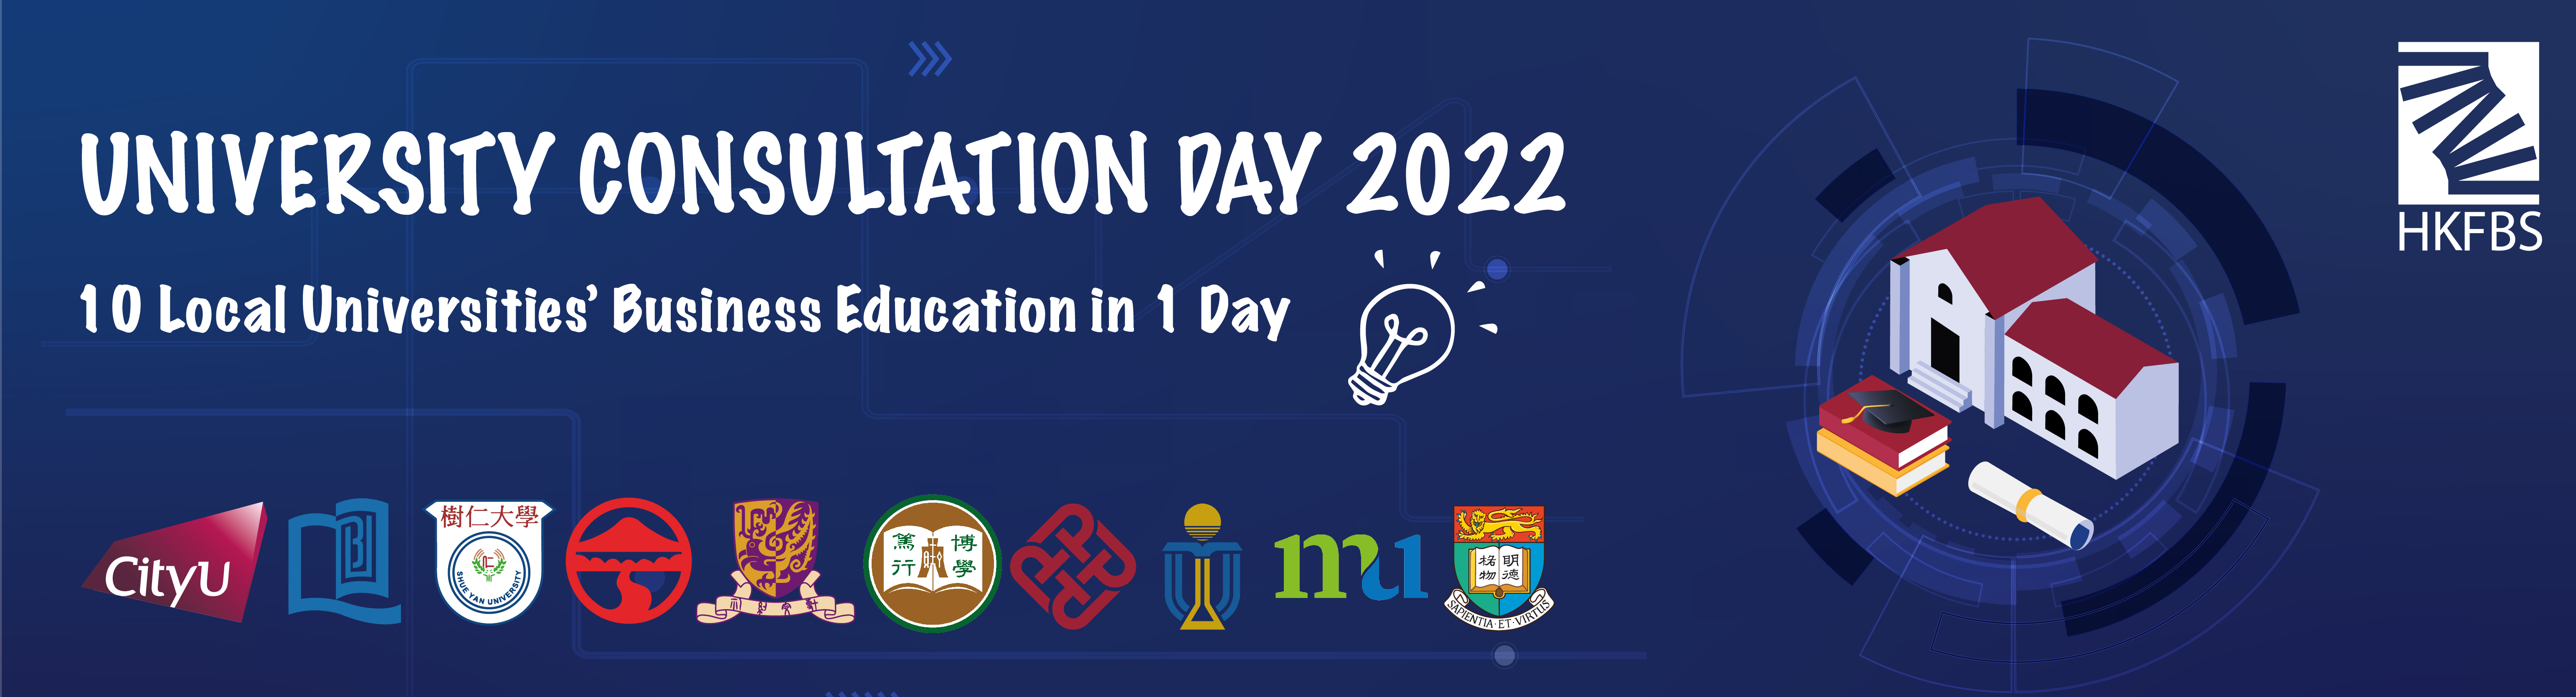 About UCD 2022